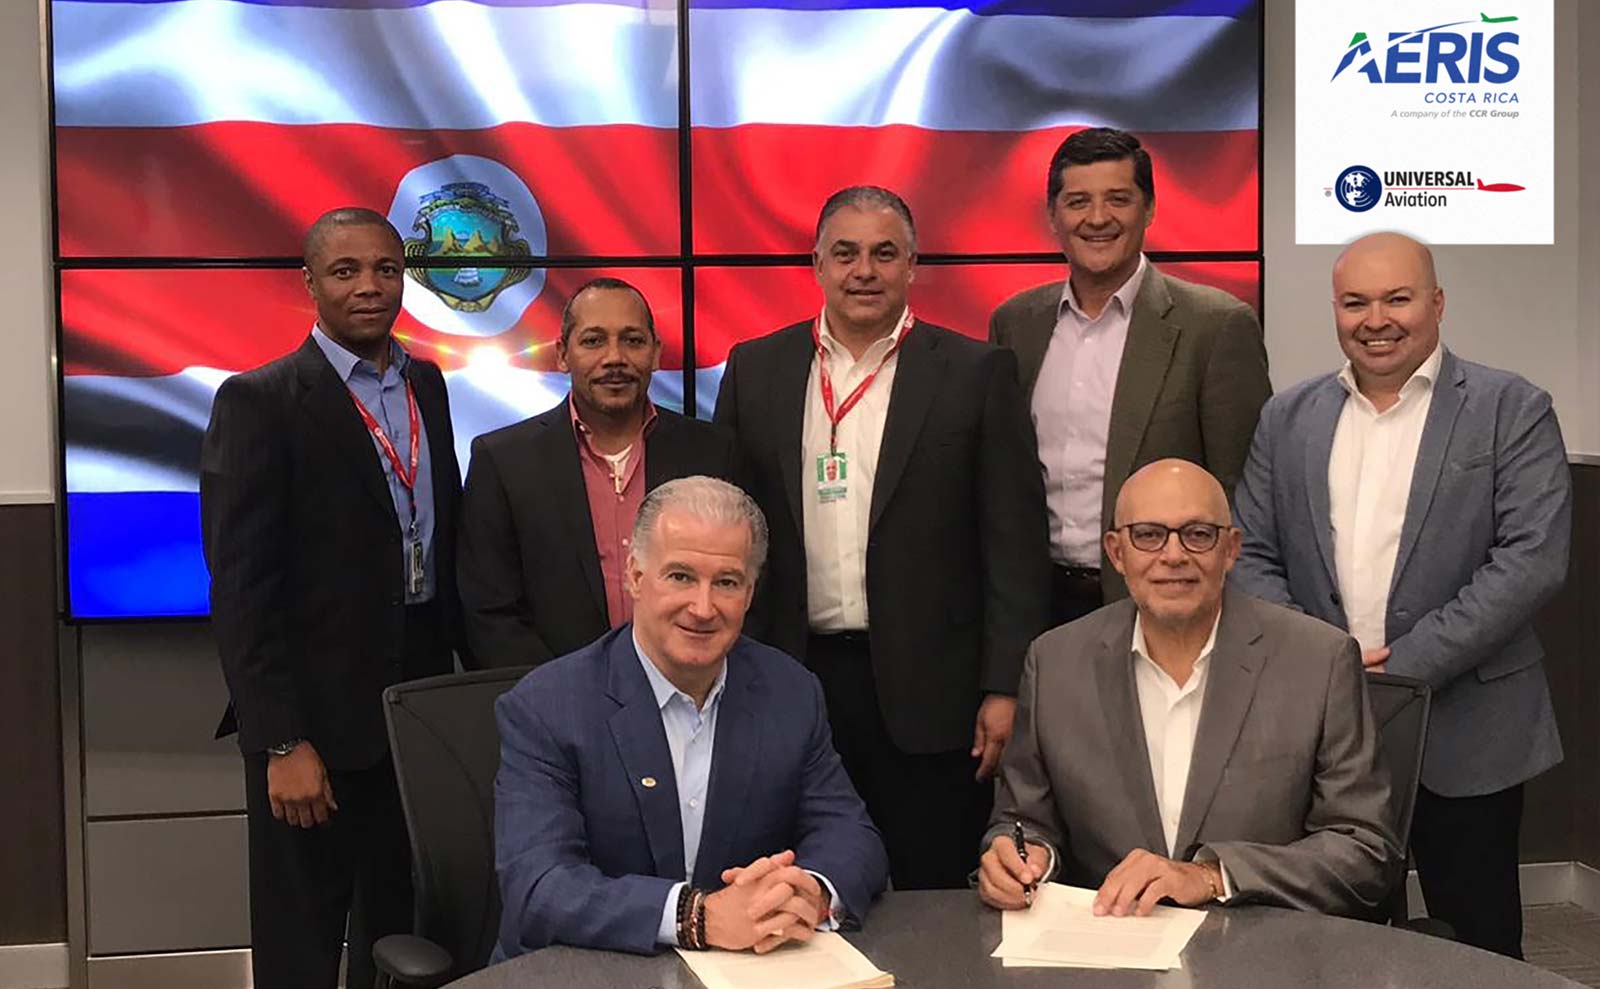 Universal Aviation part of consortium chosen to build and manage Costa Rica’s first General Aviation Terminal